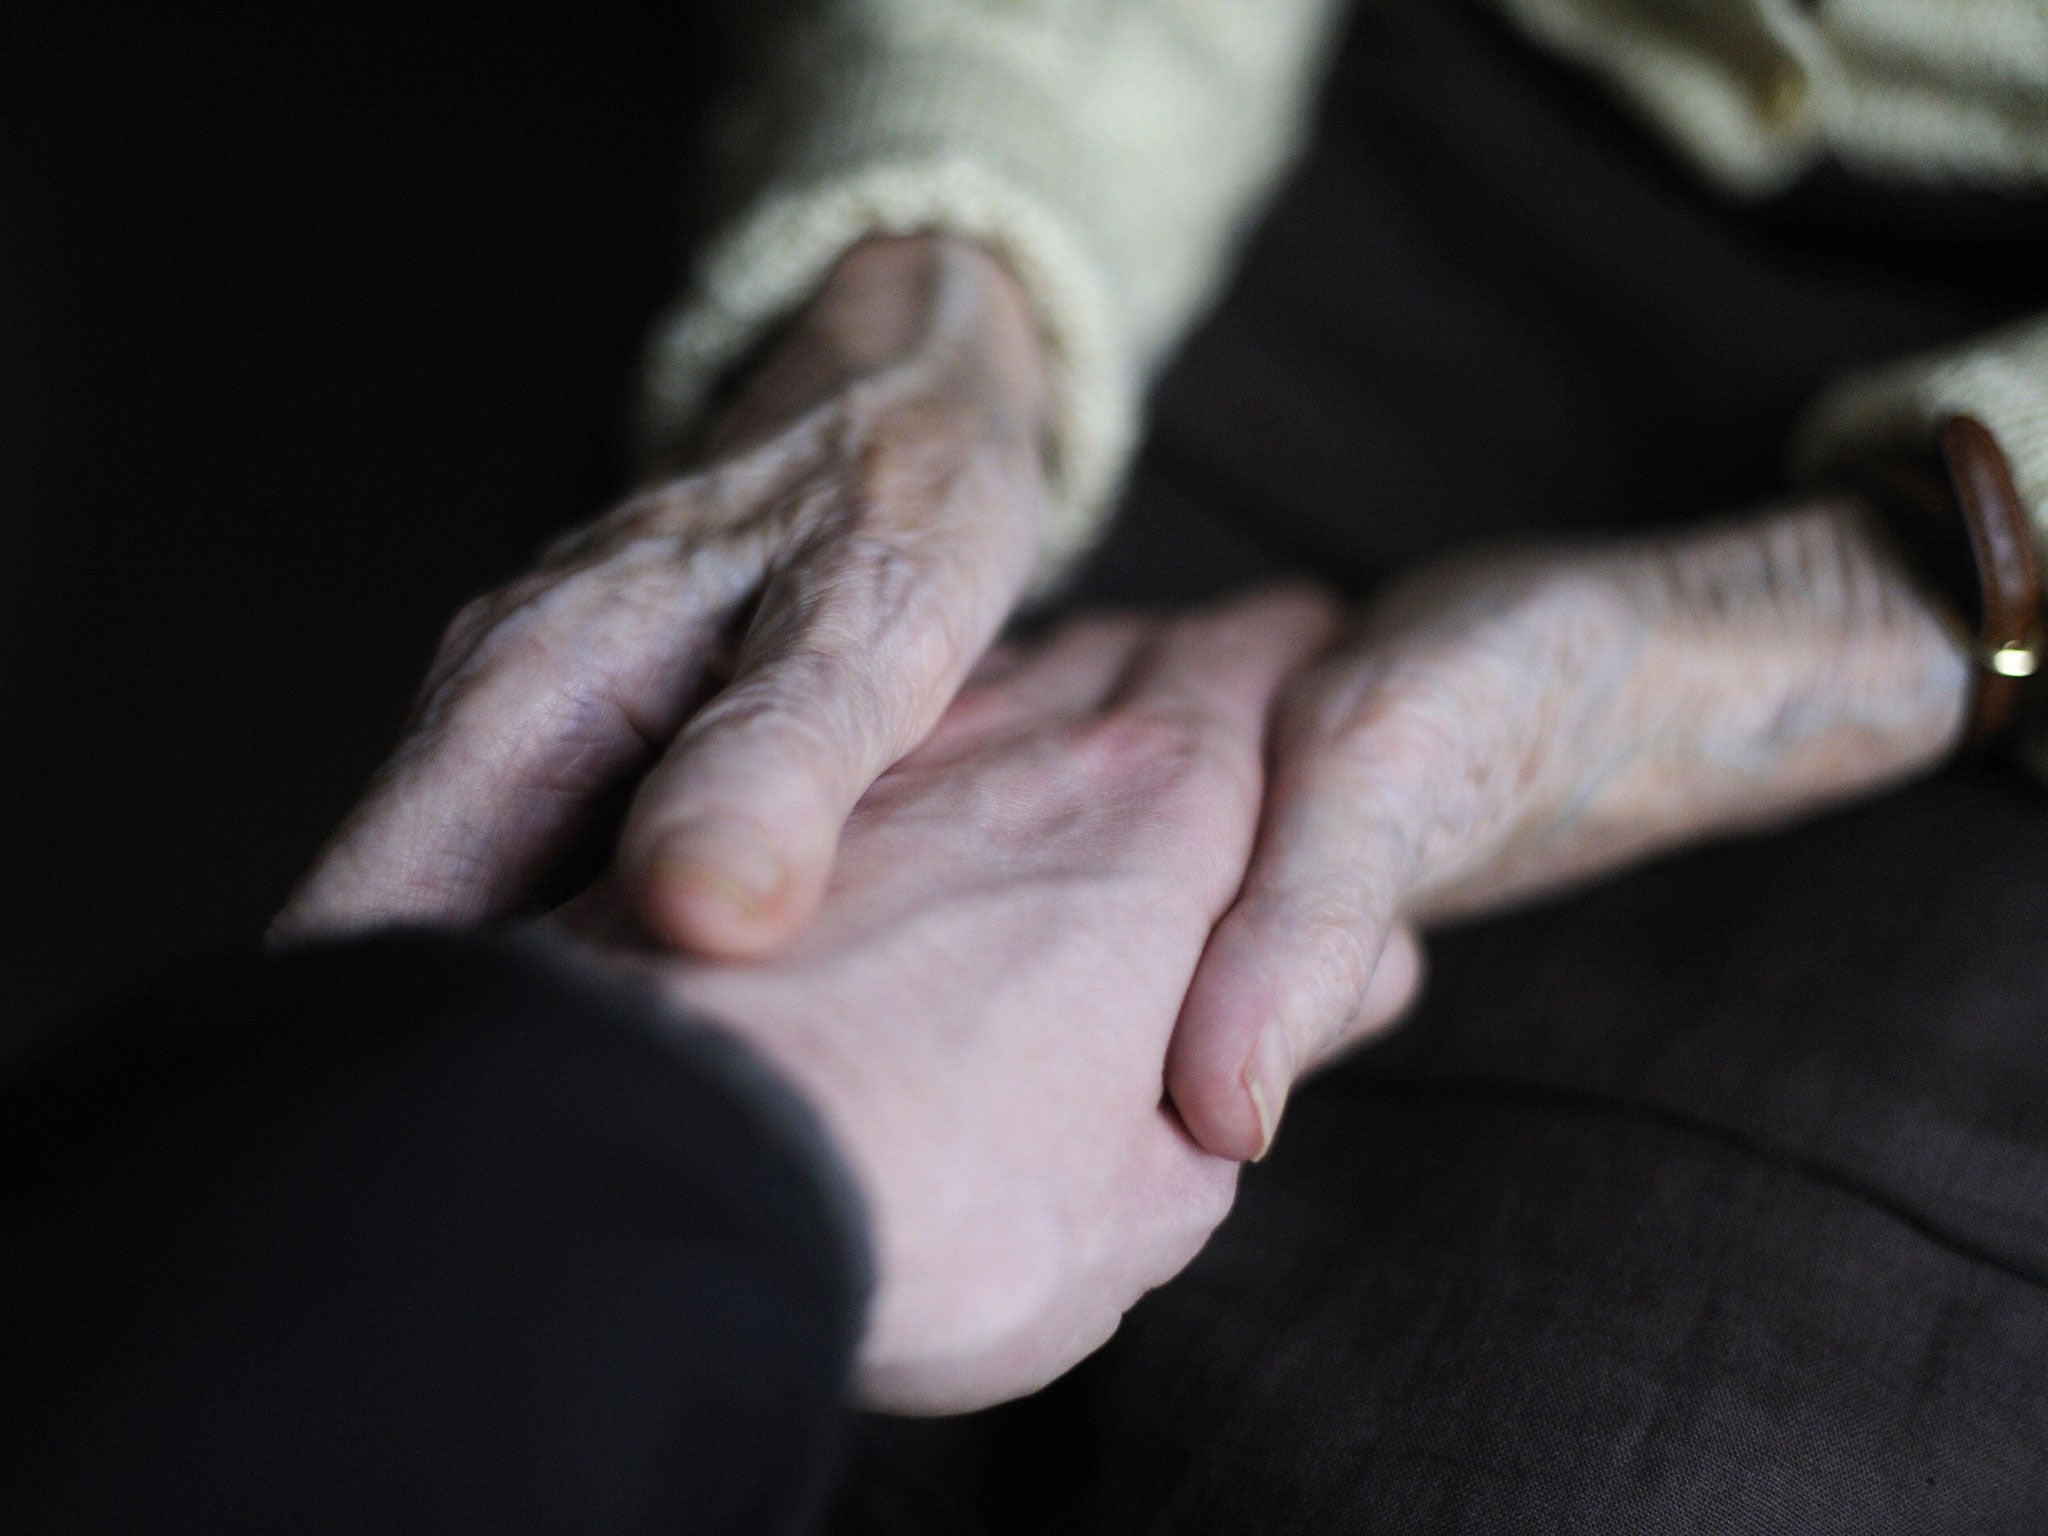 A woman, suffering from Alzheimer's desease, holds the hand of a relative on March 18, 2011 in a retirement house in Angervilliers, eastern France.